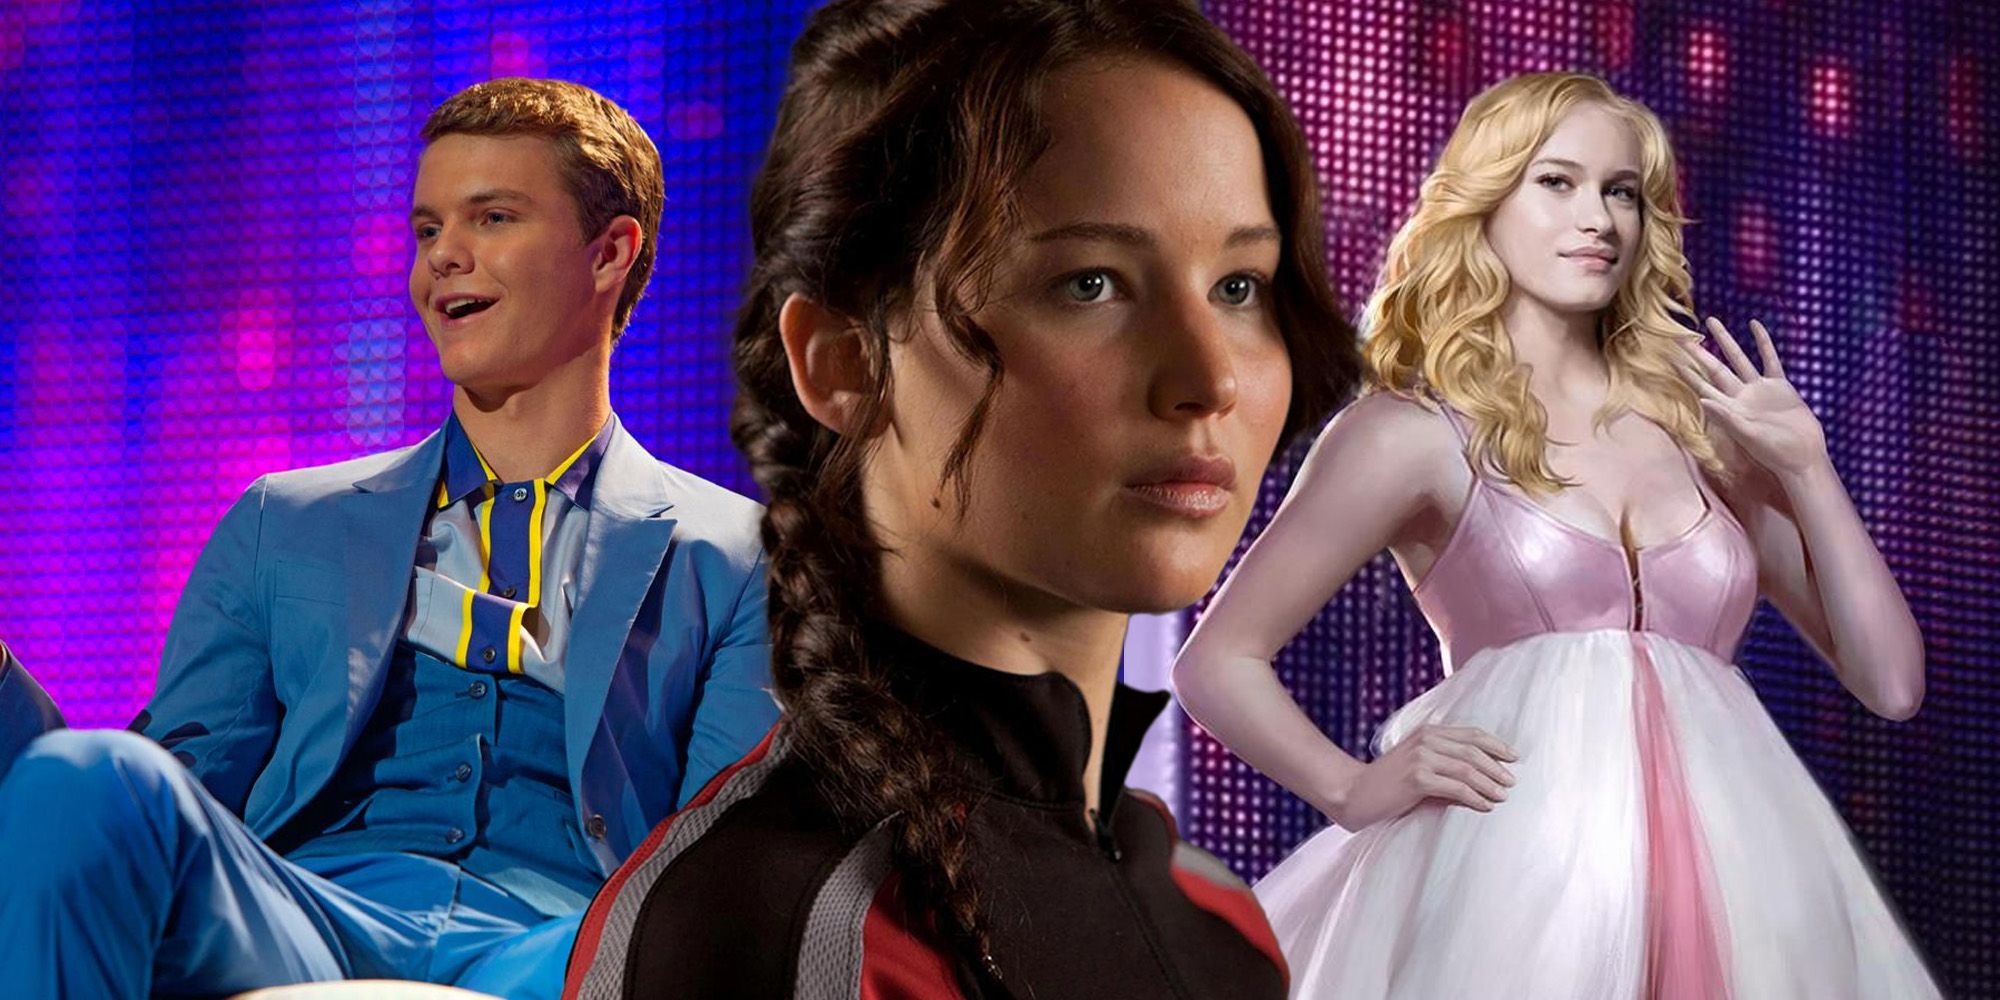 A blended image features Marvel and Glimmer during their Hunger Games interviews in the background and Katniss in her training uniform in the foreground from the first Hunger Games movie